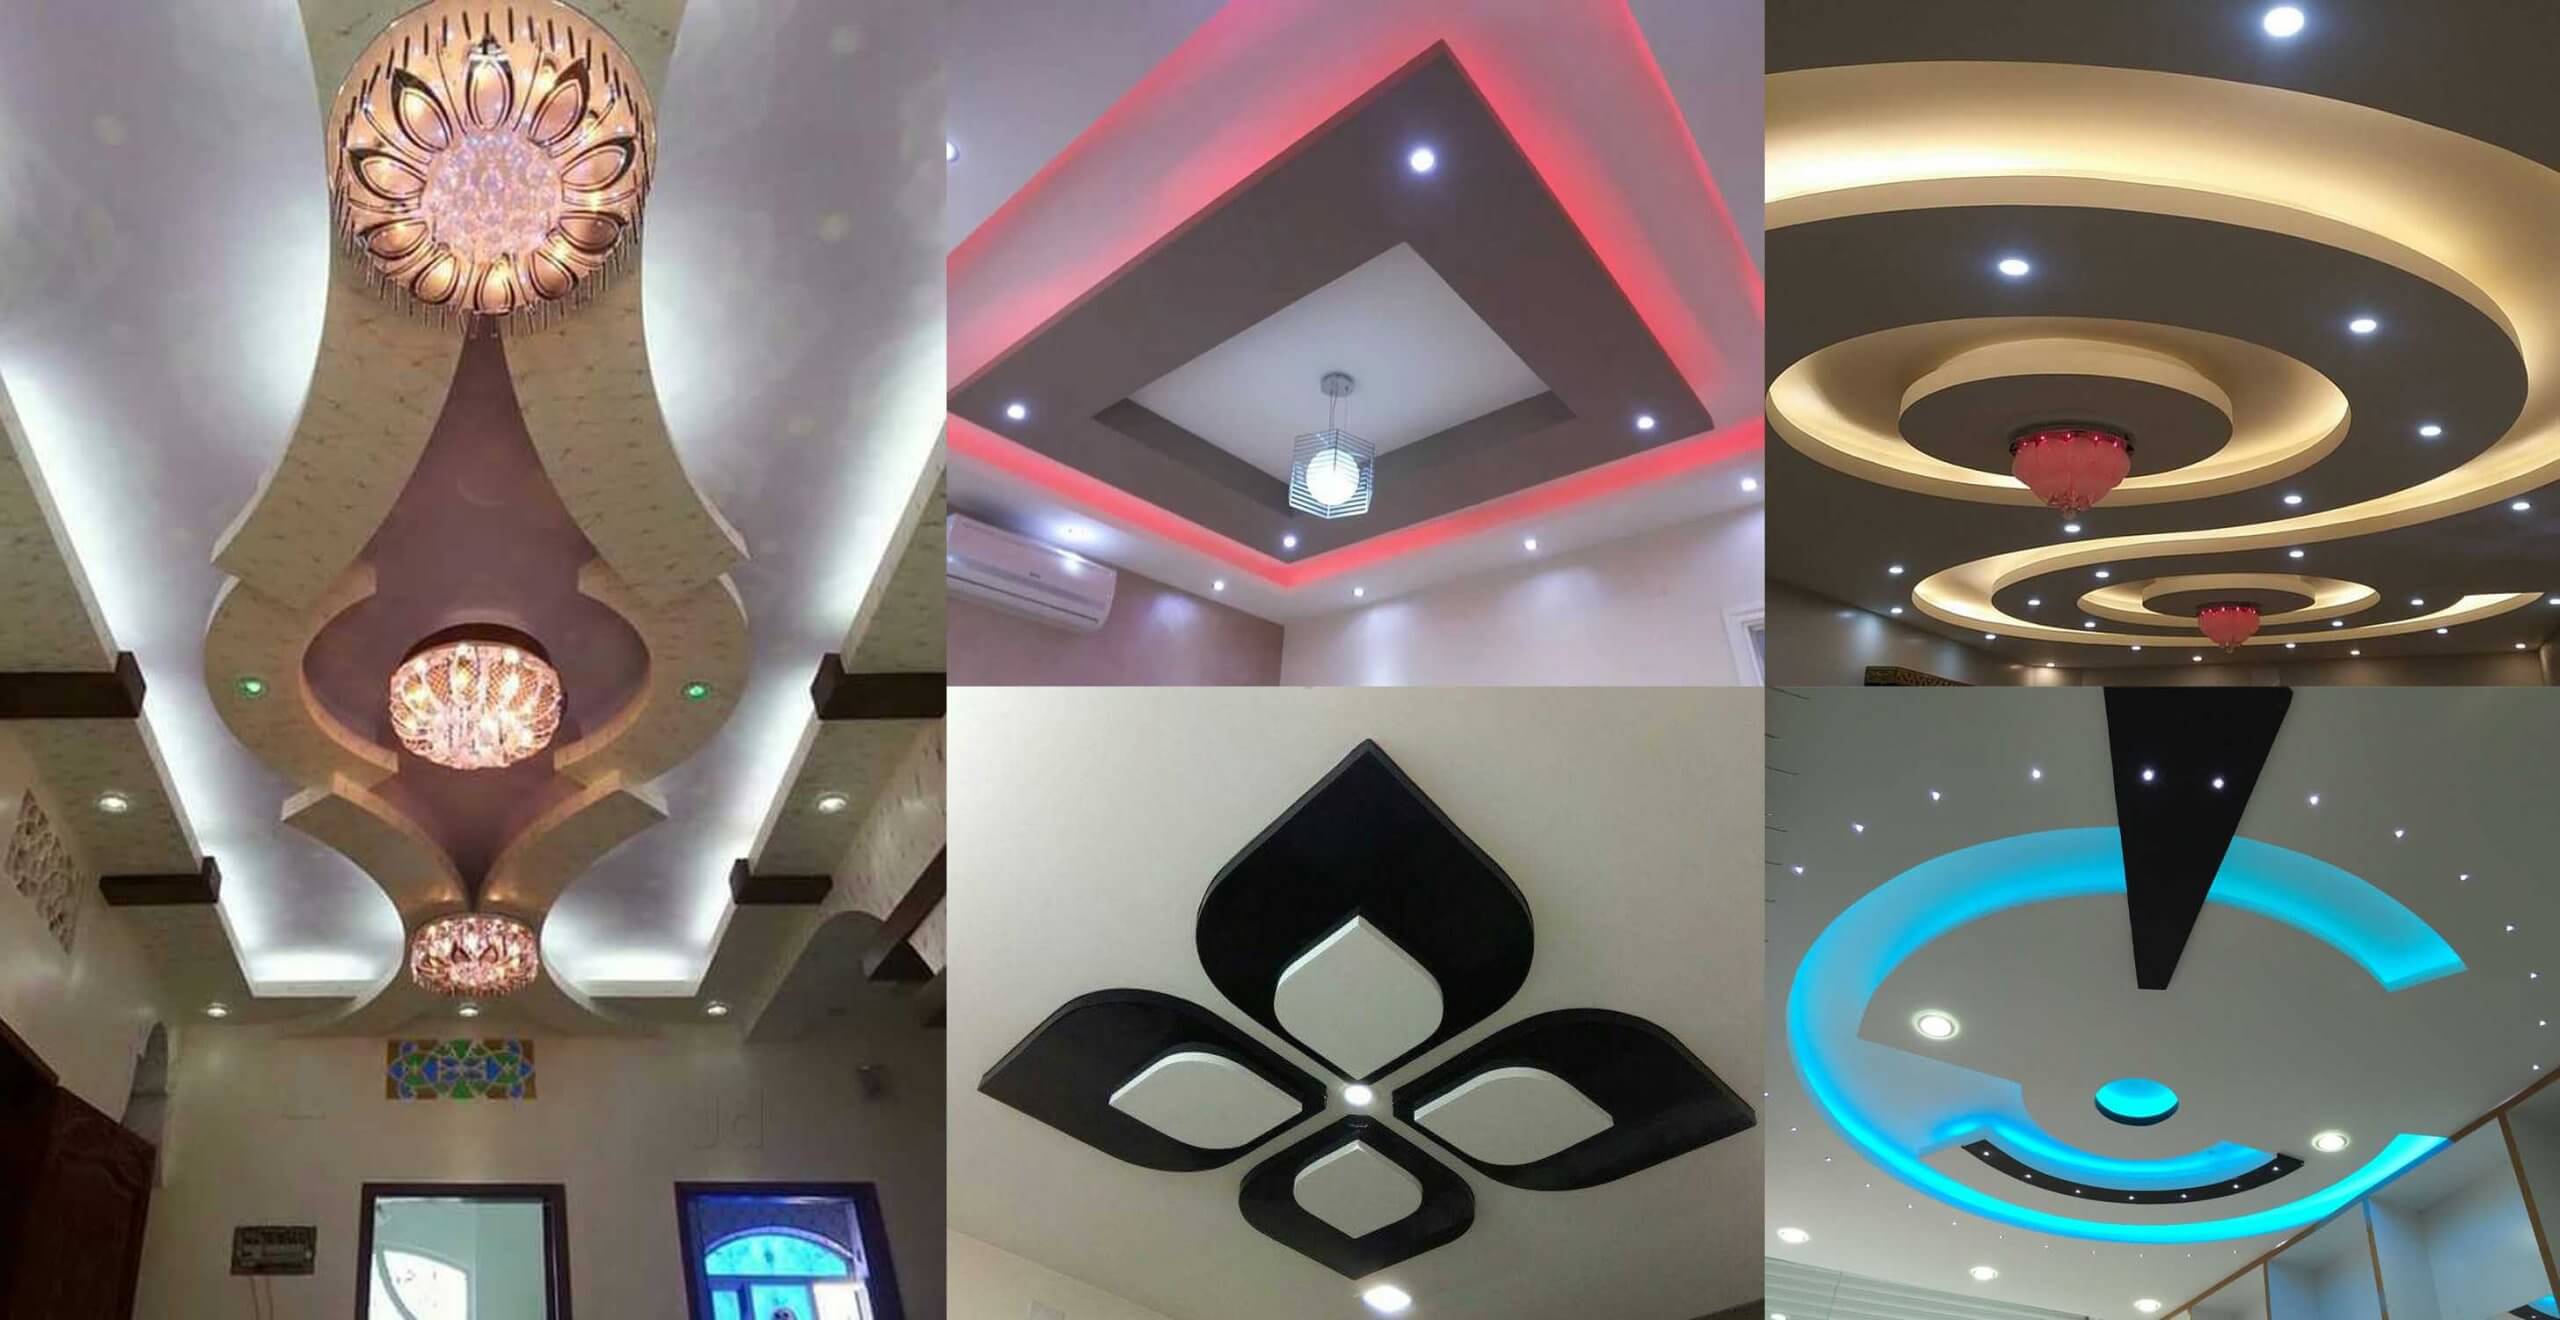 Modern Ceiling Design Ideas Engineering Discoveries